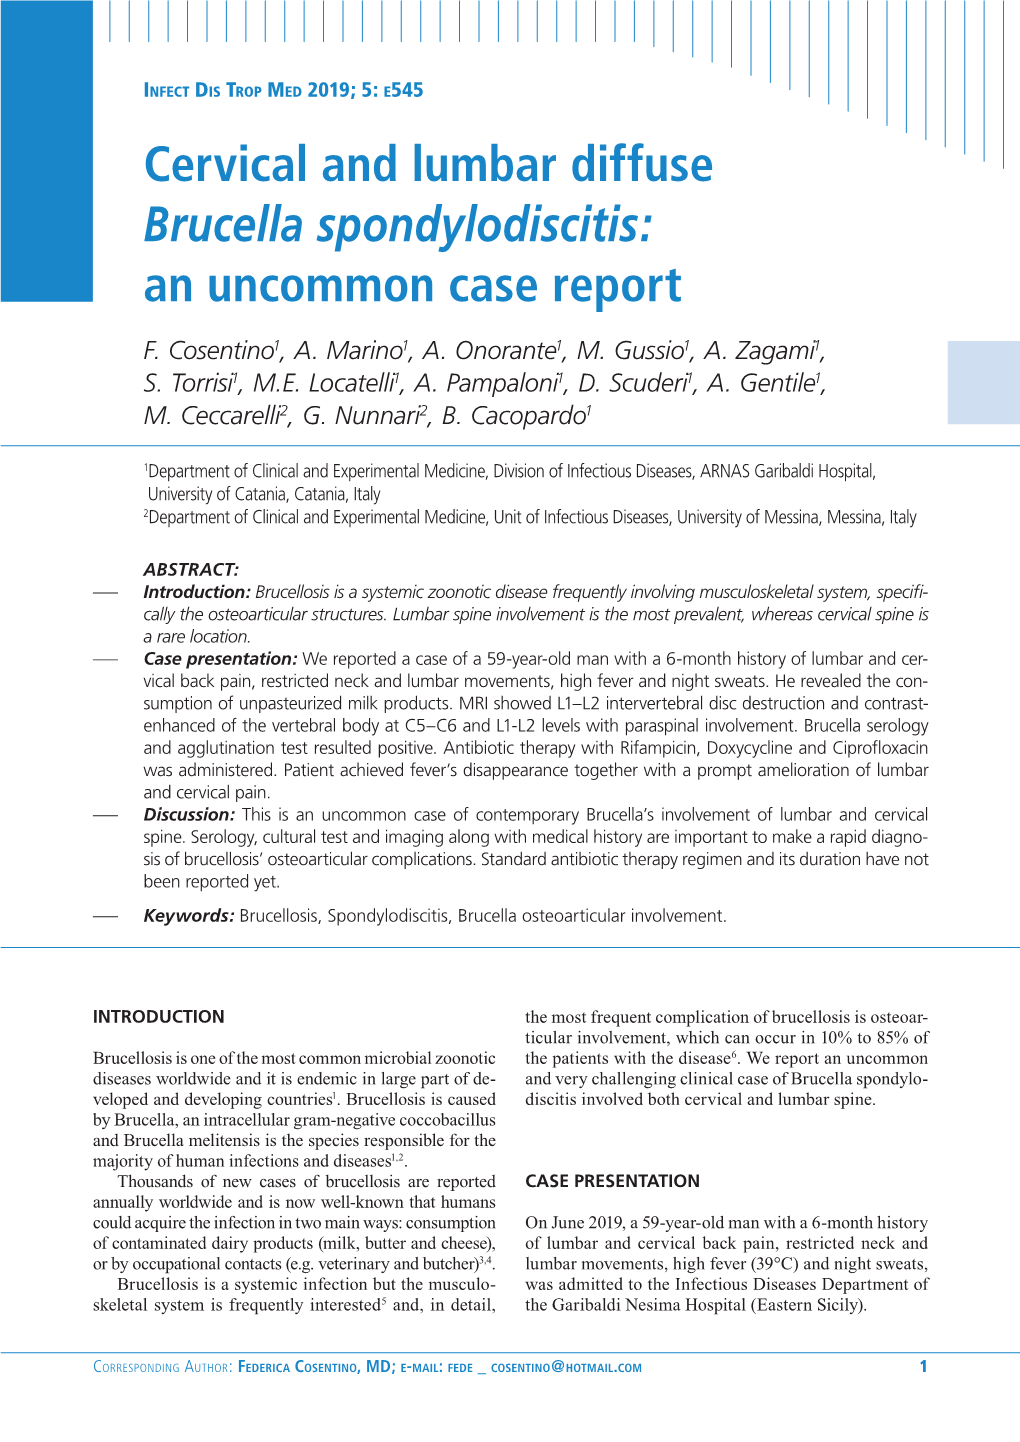 Cervical and Lumbar Diffuse Brucella Spondylodiscitis: an Uncommon Case Report